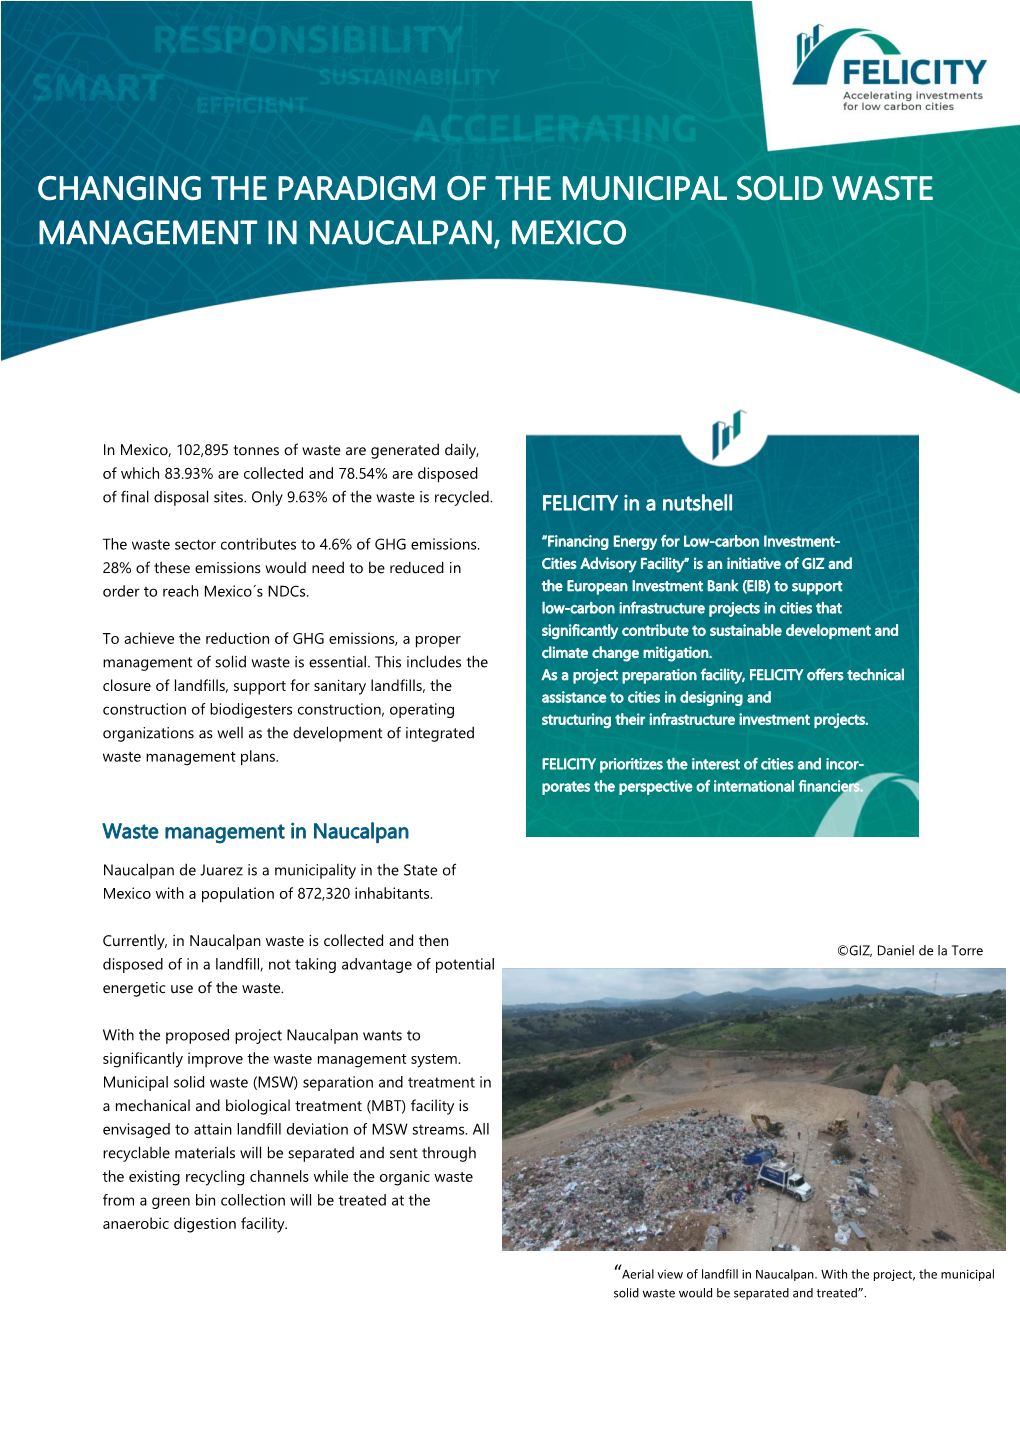 Changing the Paradigm of the Municipal Solid Waste Management in Naucalpan, Mexico